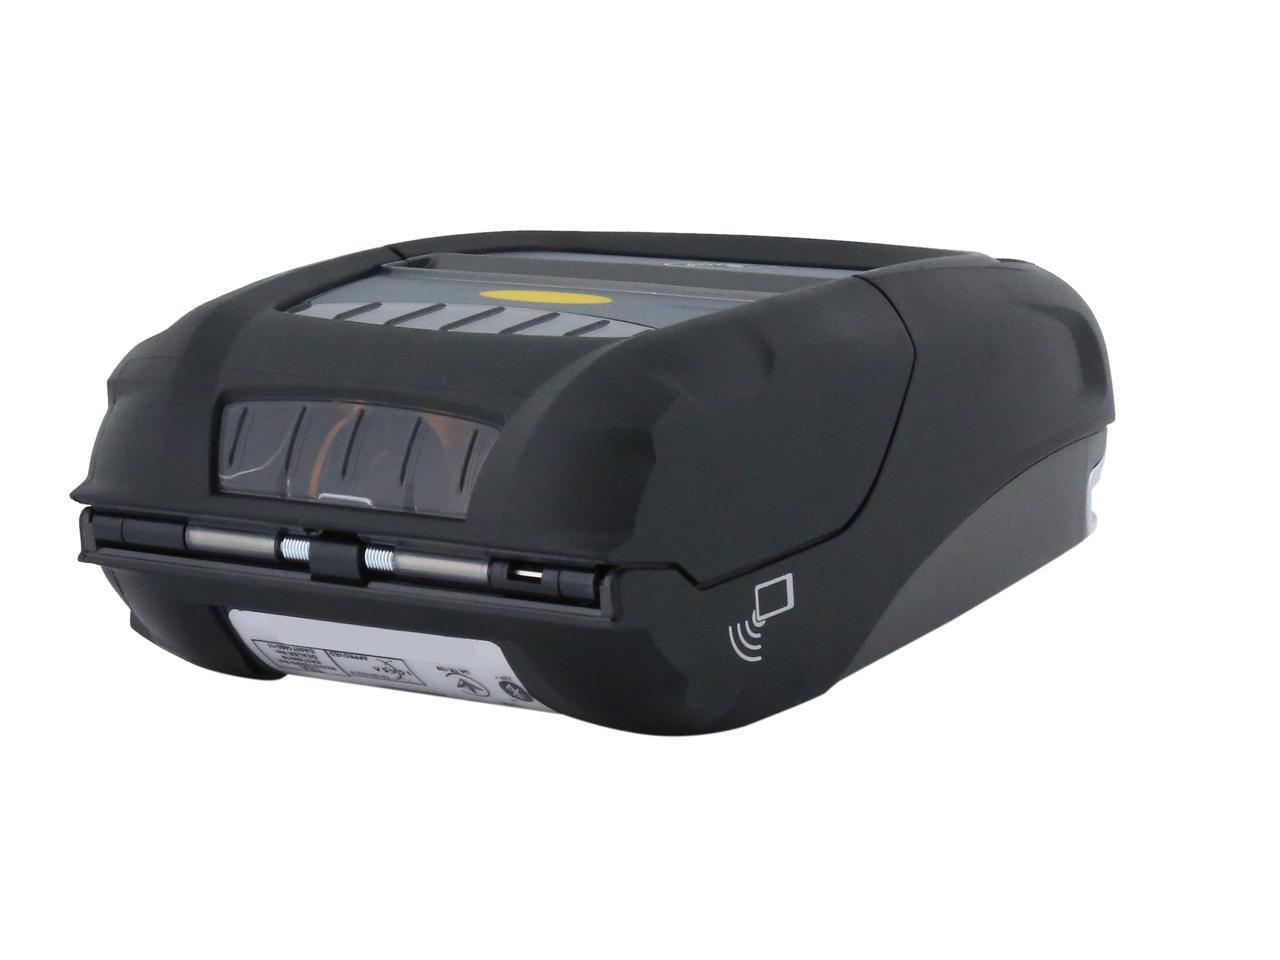 Zebra Zq510 3 Mobile Direct Thermal Receipt And Label Printer 203 Dpi Bluetooth 40 Linered 8615